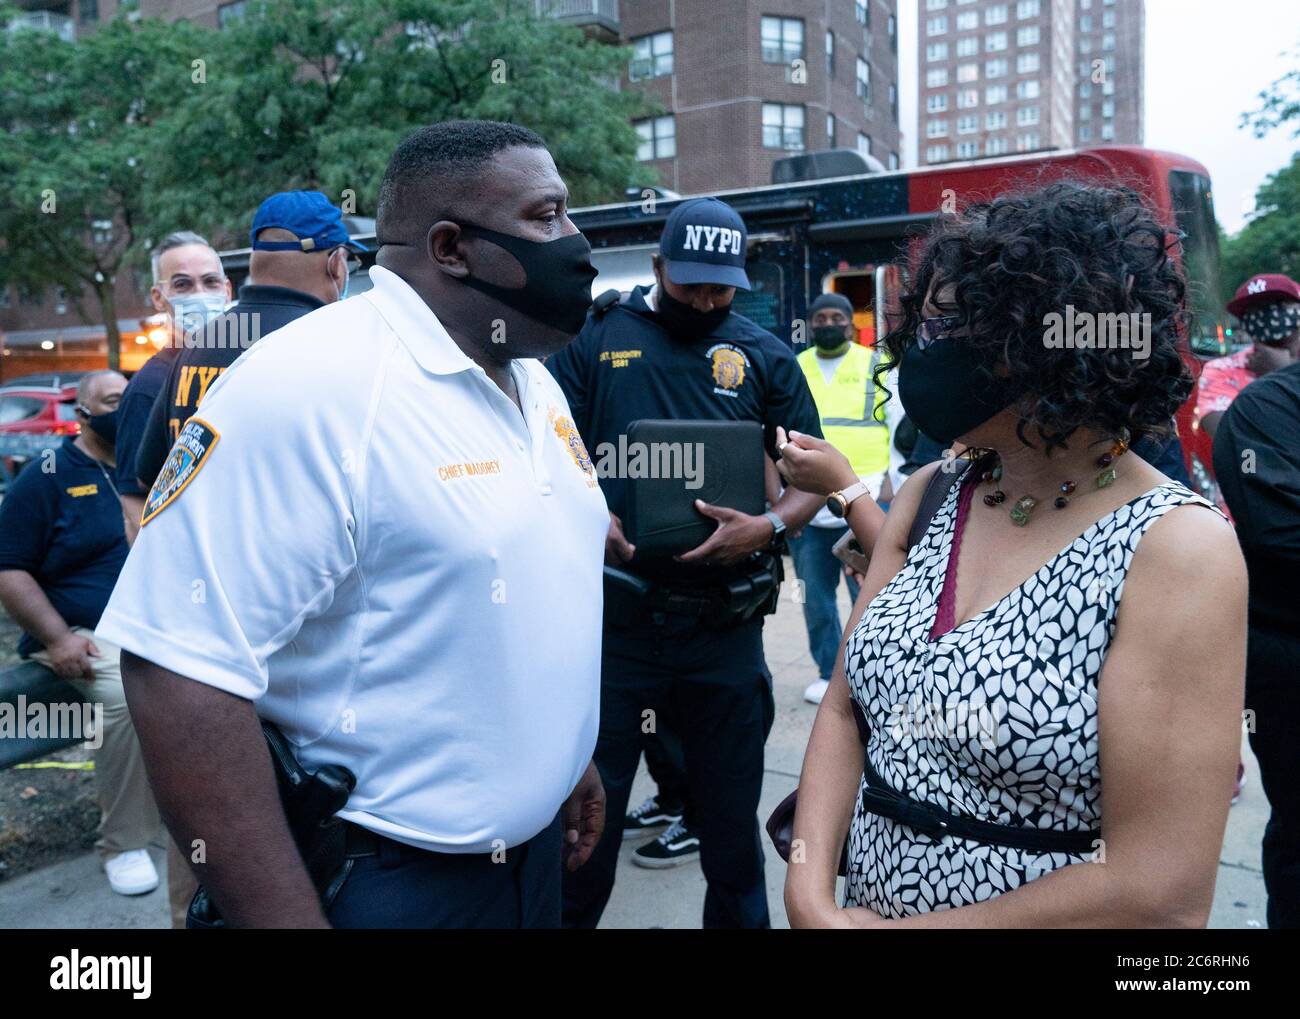 New York, United States. 11th July, 2020. NYPD Chief Jeffrey Maddrey speaks to local resident at Occupy the Corner rally in East Harlem in response on gun violence in New York on July 11, 2020. Gun violence in 2020 surged by more than 100% in New York City mostly in neighborhoods with high rate of poverty and high level of COVID-19 cases. Community activists and police department encreased presence in those areas in order to stop gun violence. (Photo by Lev Radin/Sipa USA) Credit: Sipa USA/Alamy Live News Stock Photo